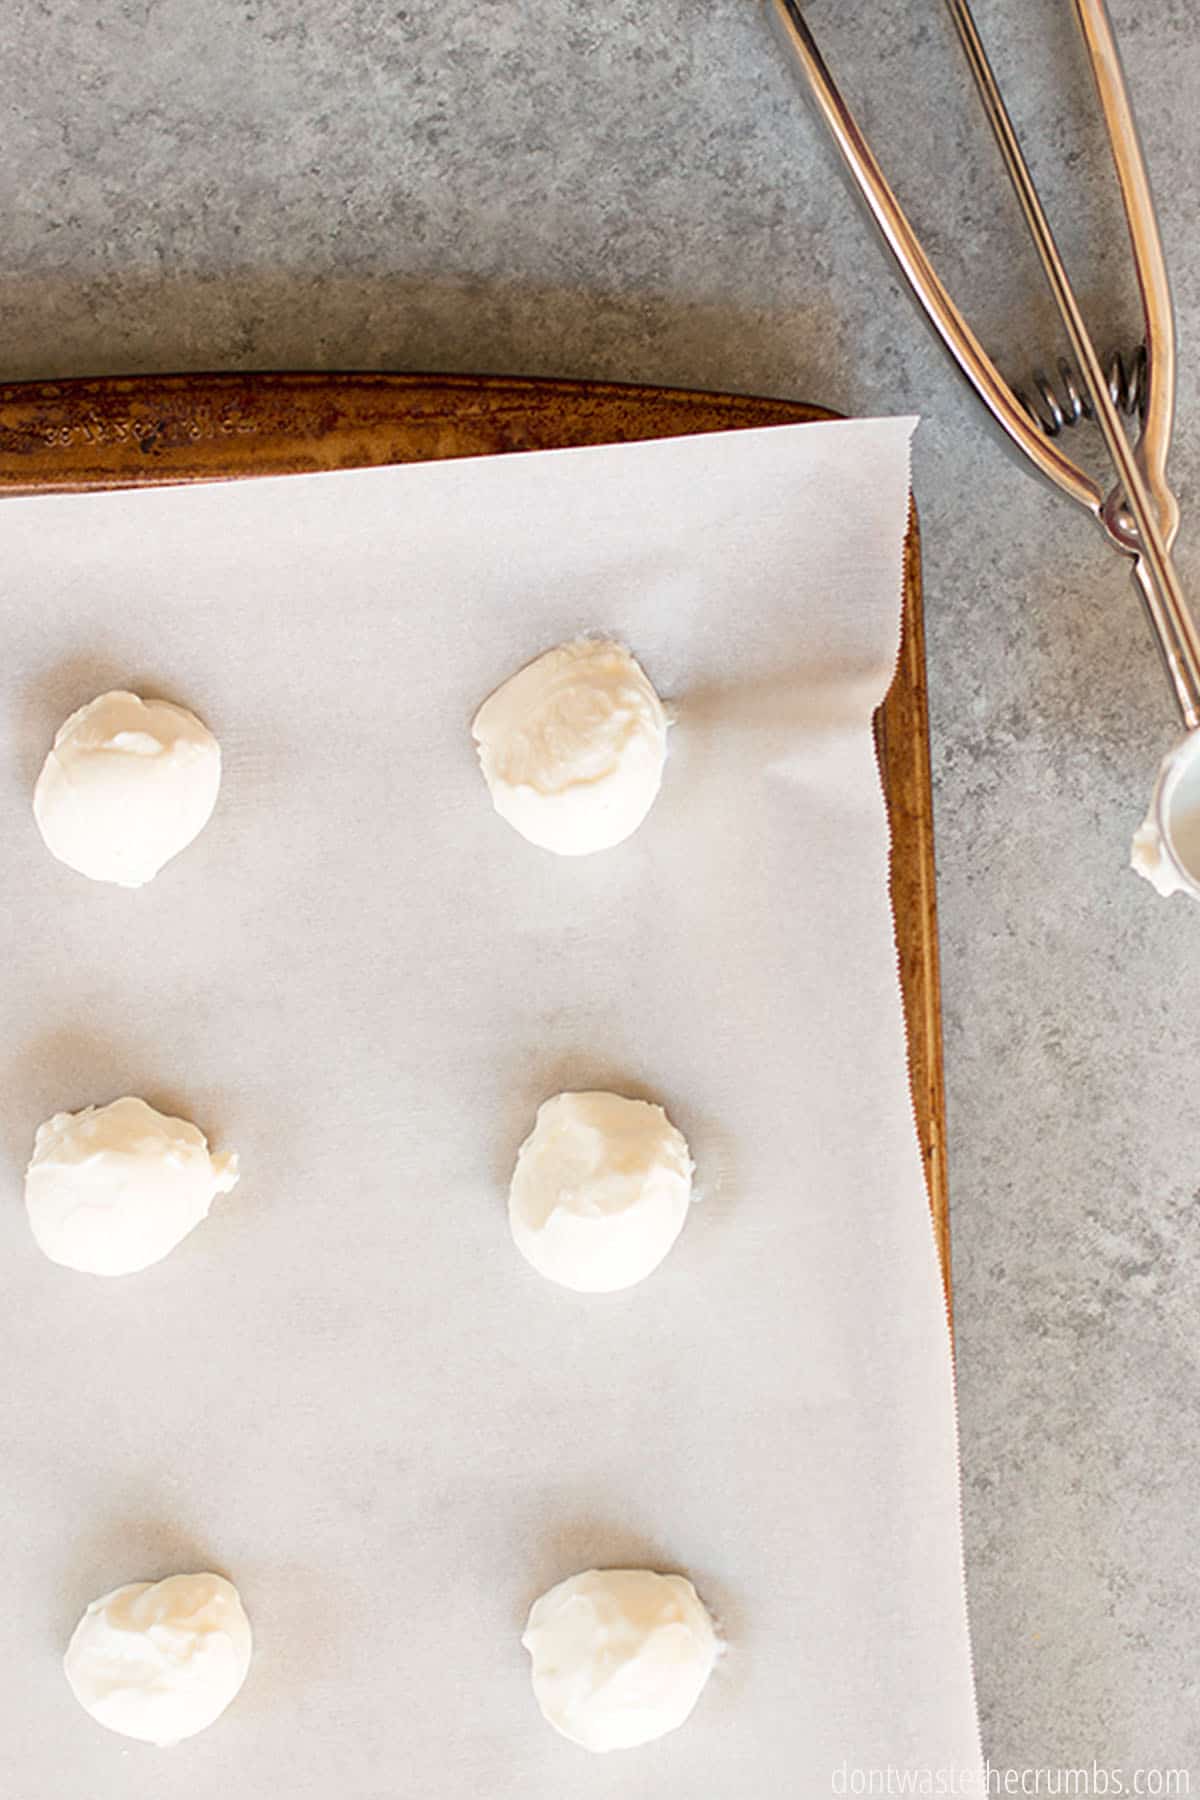 Six small scoops of yogurt on parchment paper on a baking sheet. The scooper can be seen on the right side.